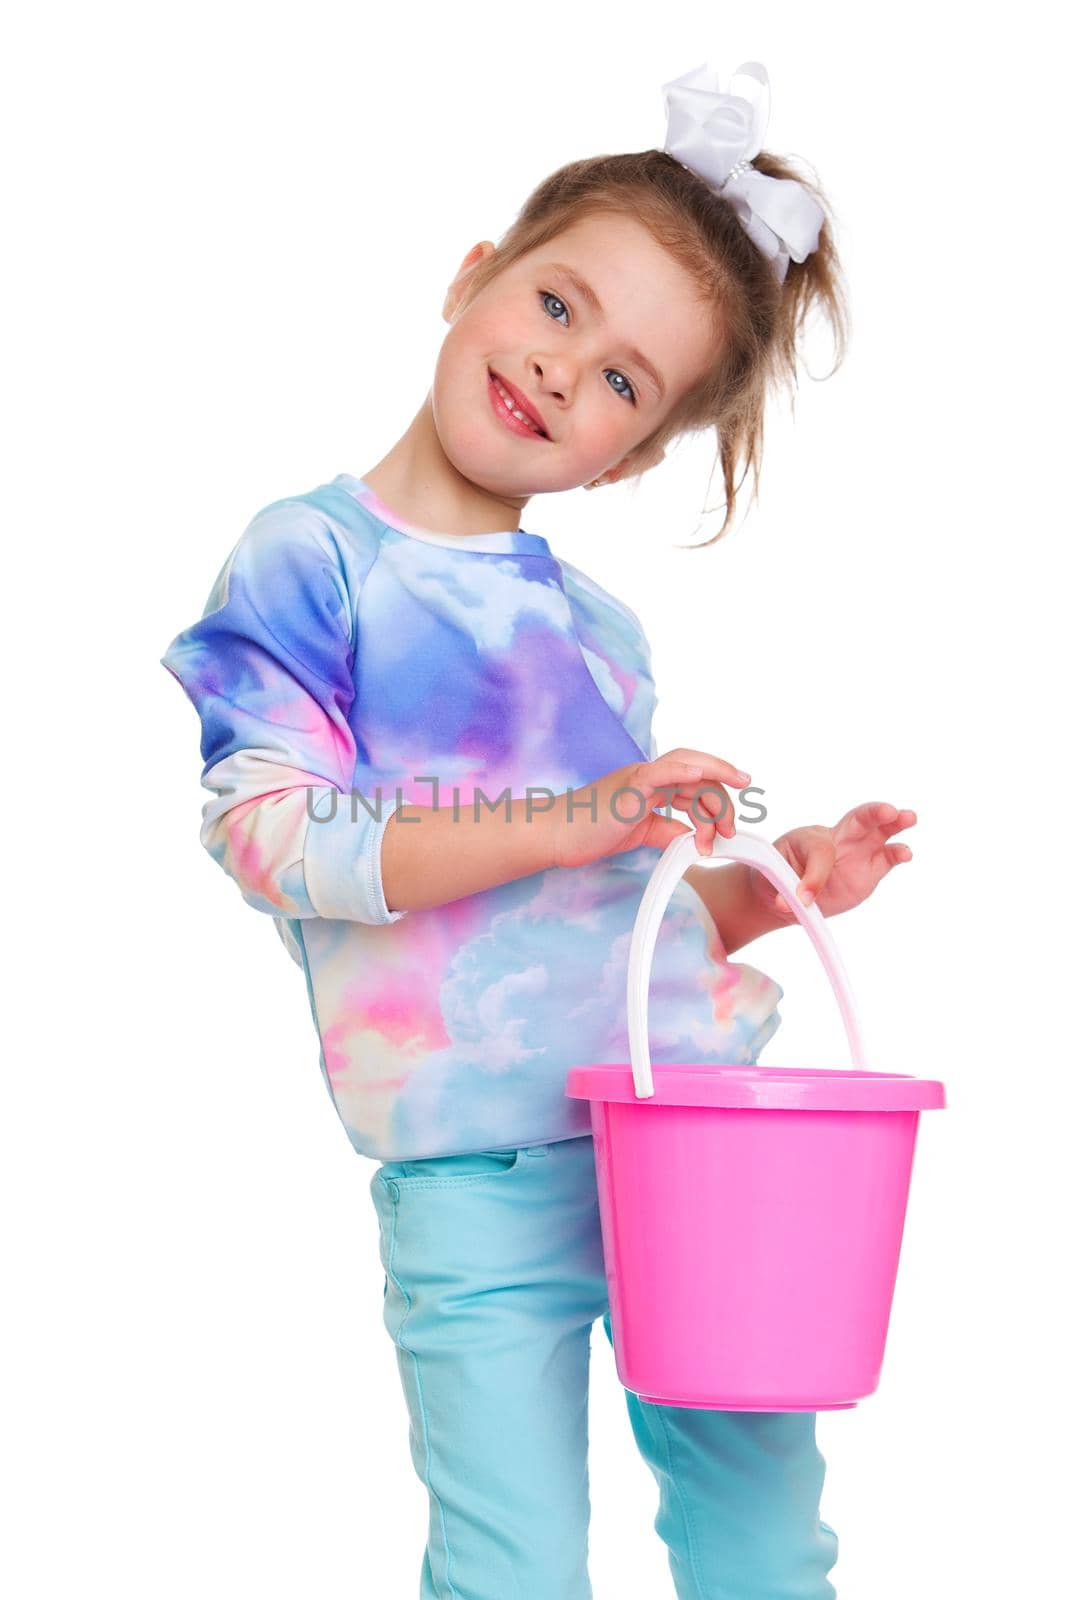 Lovely little girl standing with bucket. Cute happy kid dressed casual clothes holding pink bucket against white background. Portrait of adorable playful girl posing in studio